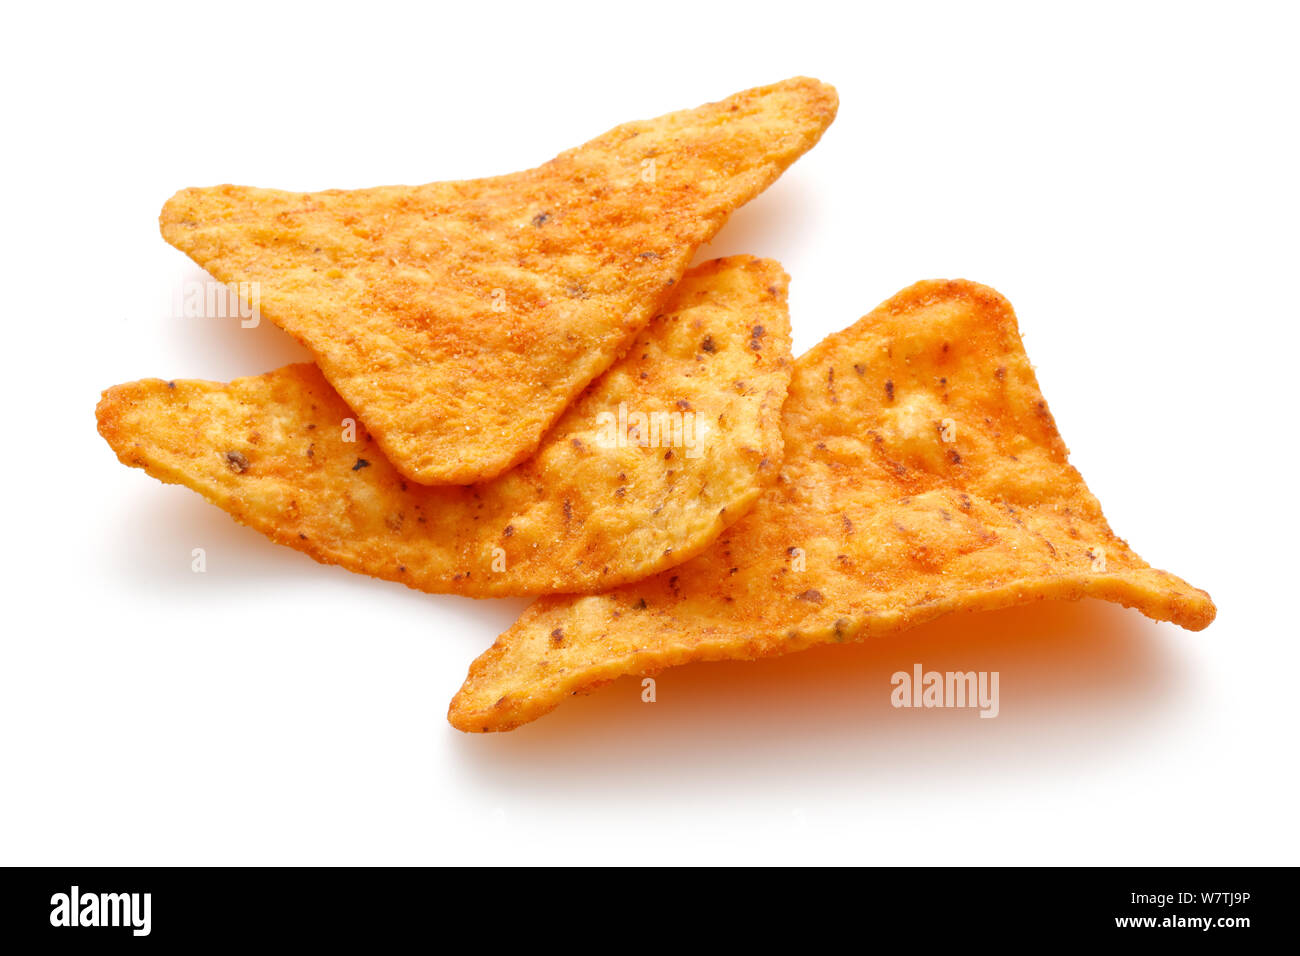 Corn tortilla chips isolated on white background Stock Photo